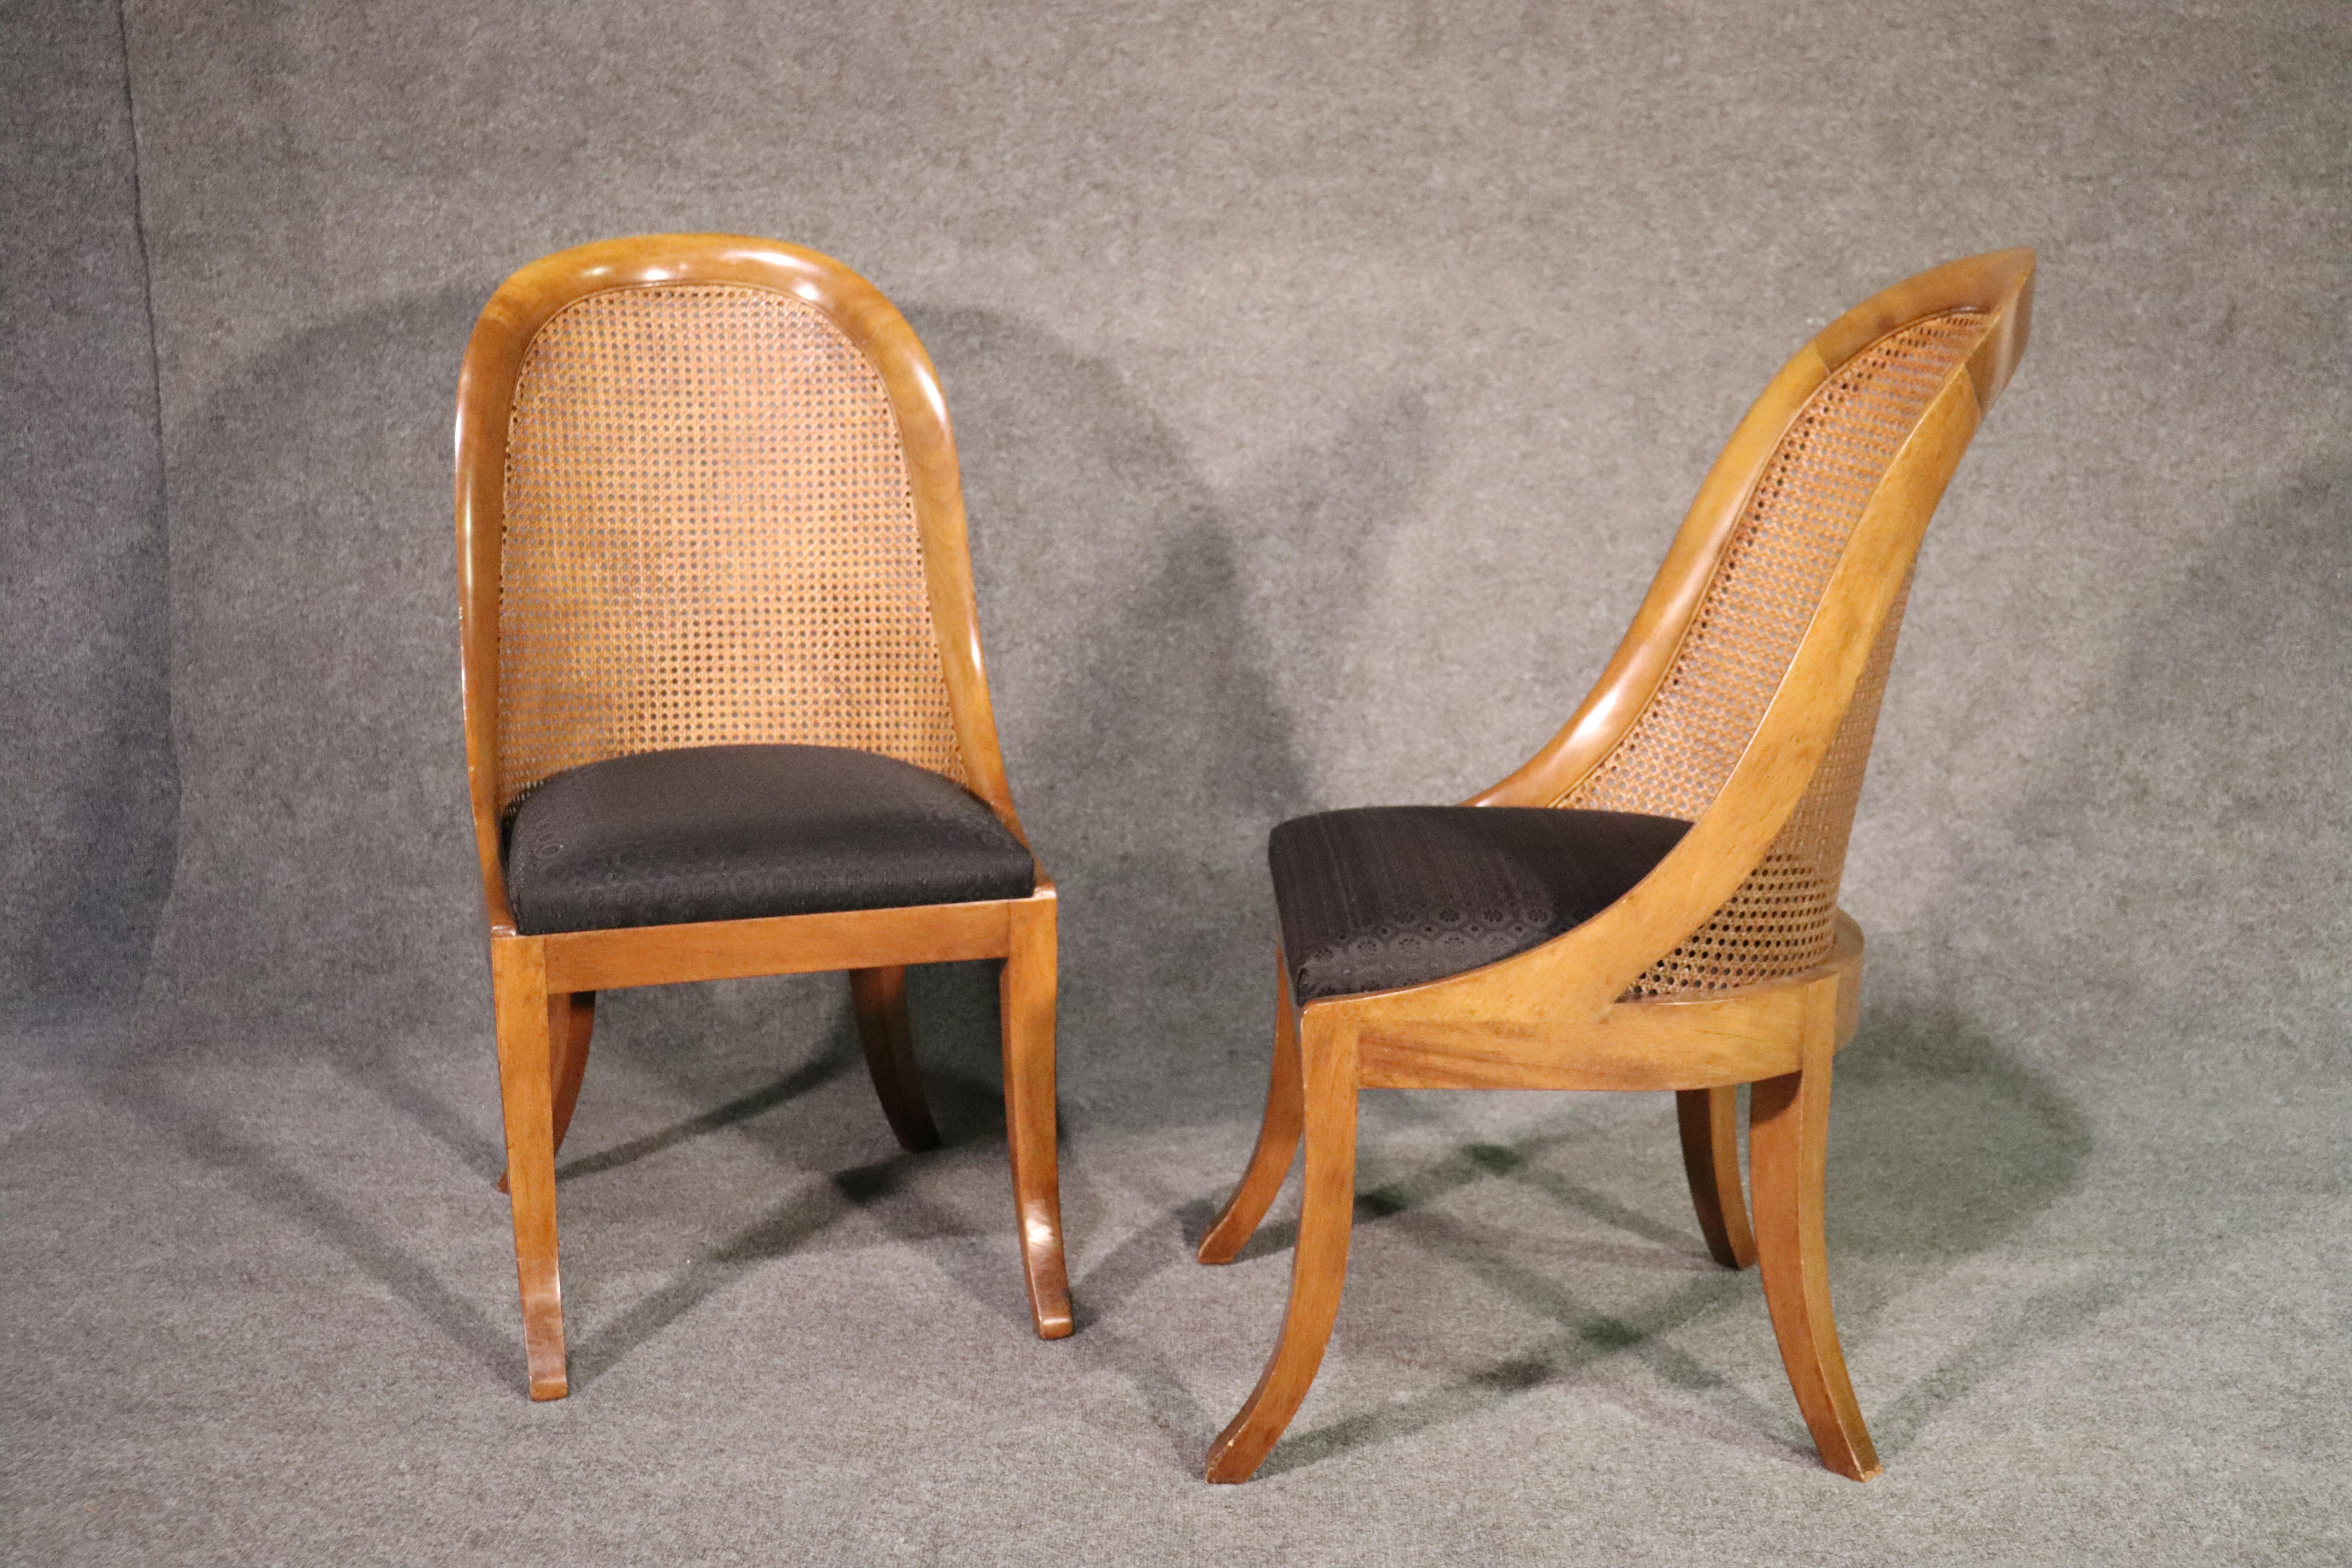 American Set of 10 Hollywood Regency Solid Walnut Cane Dining Chairs, circa 1950